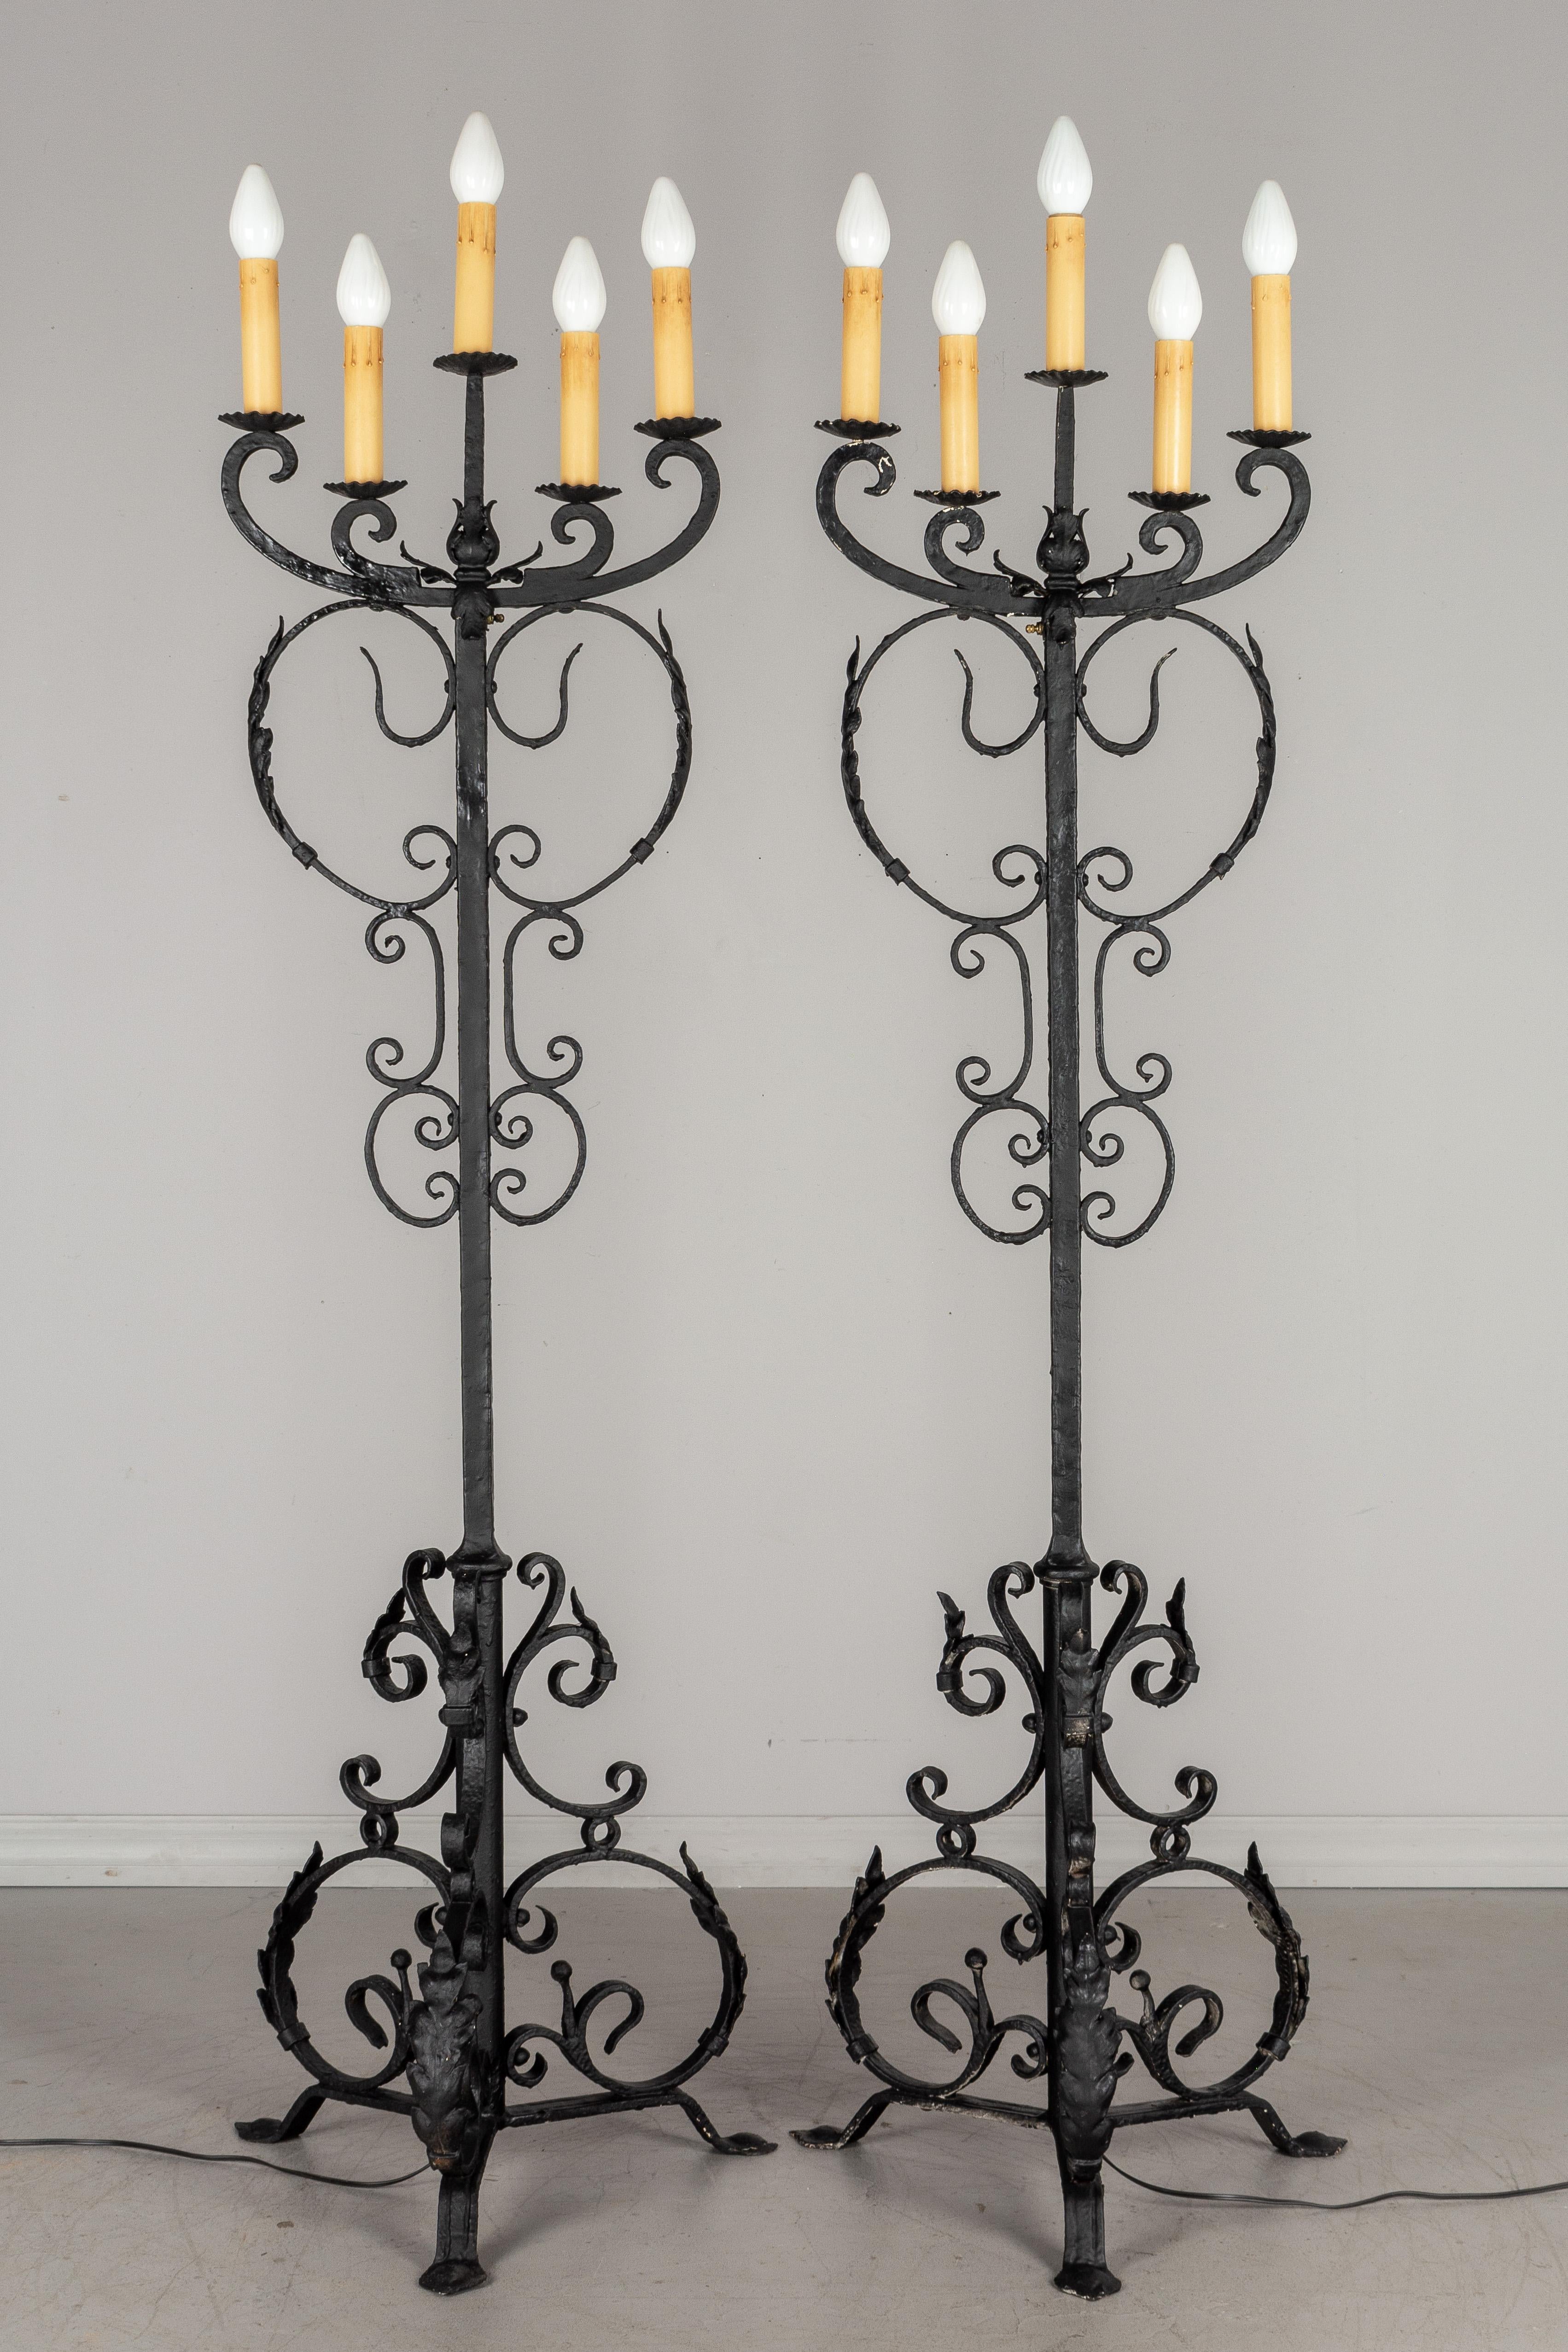 A pair of large Spanish Baroque Revival wrought iron electrified five-light floor torchères with hand forged scrolling iron work and tôle acanthus leaves. Heavy coating of black paint. Rewired and in working condition. Old paper candle covers.